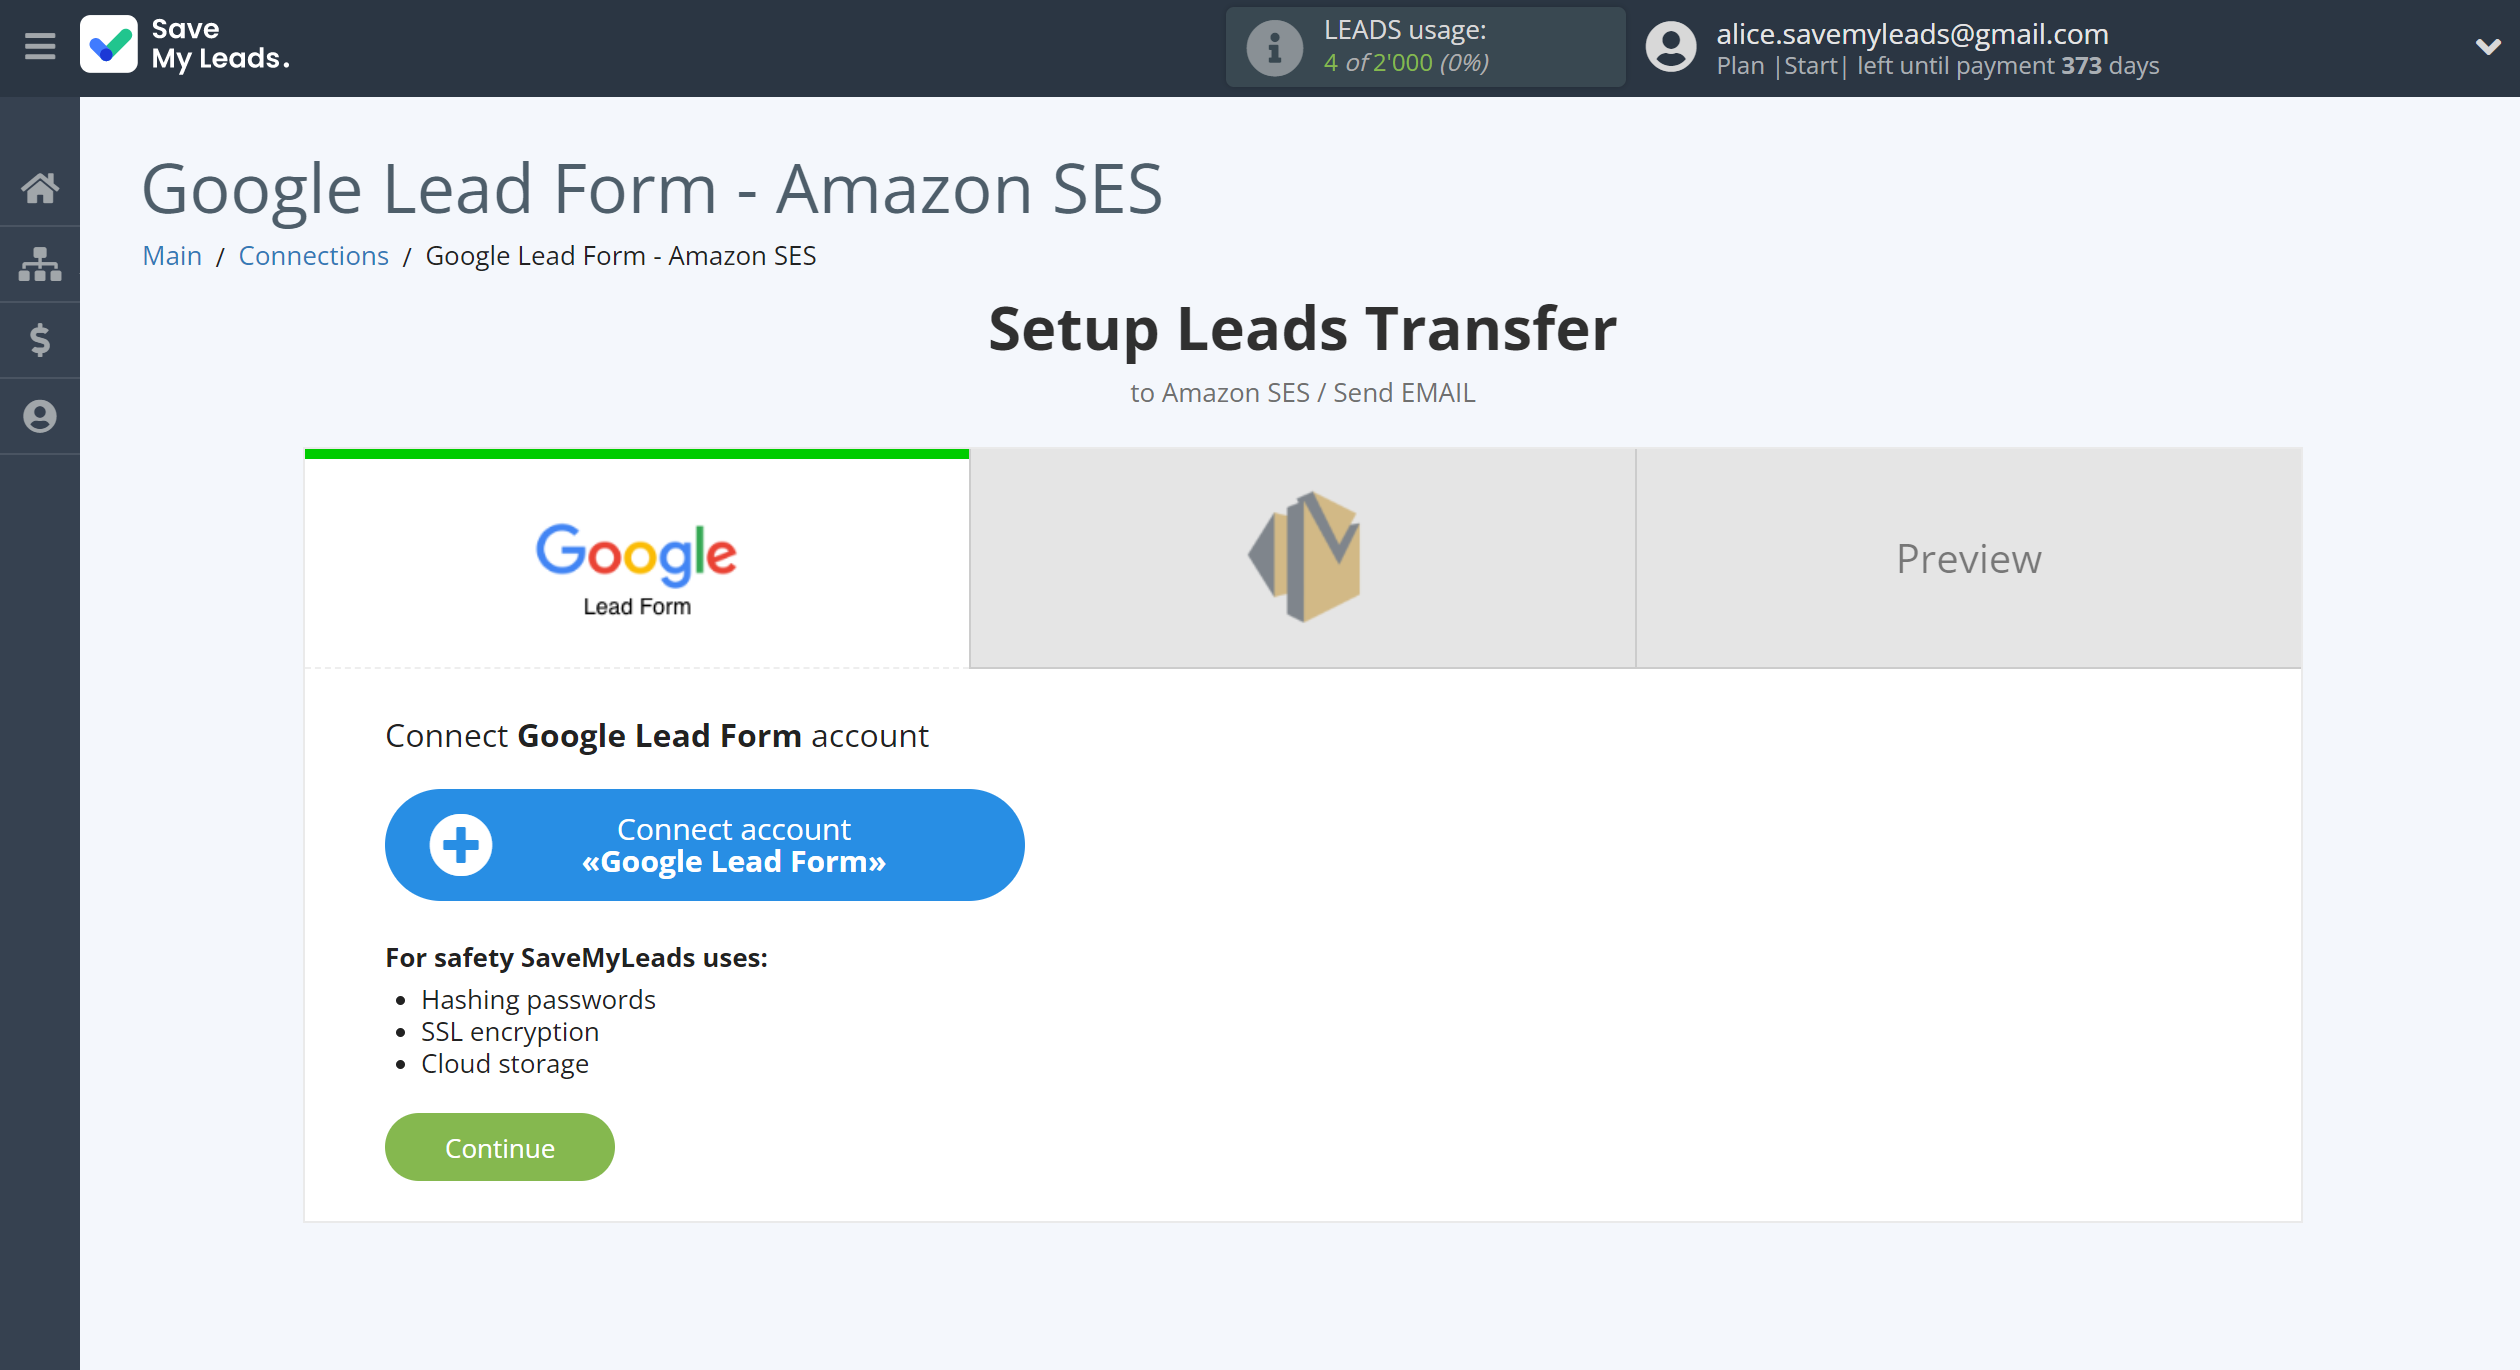 How to Connect Google Lead Form with Amazon SES| Data Source account connection